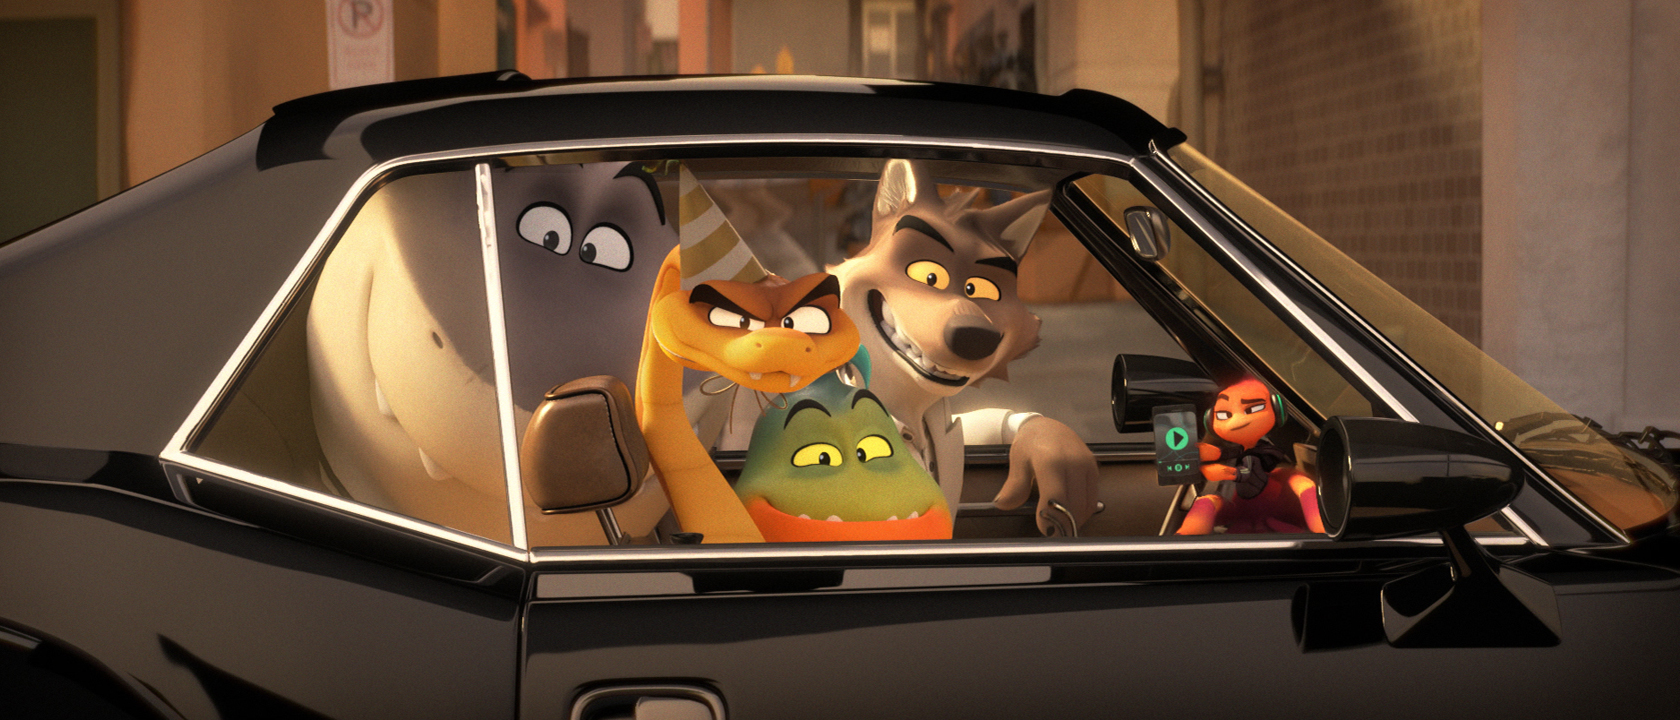 The Bad Guys Review: Zootopia Without The Nuance